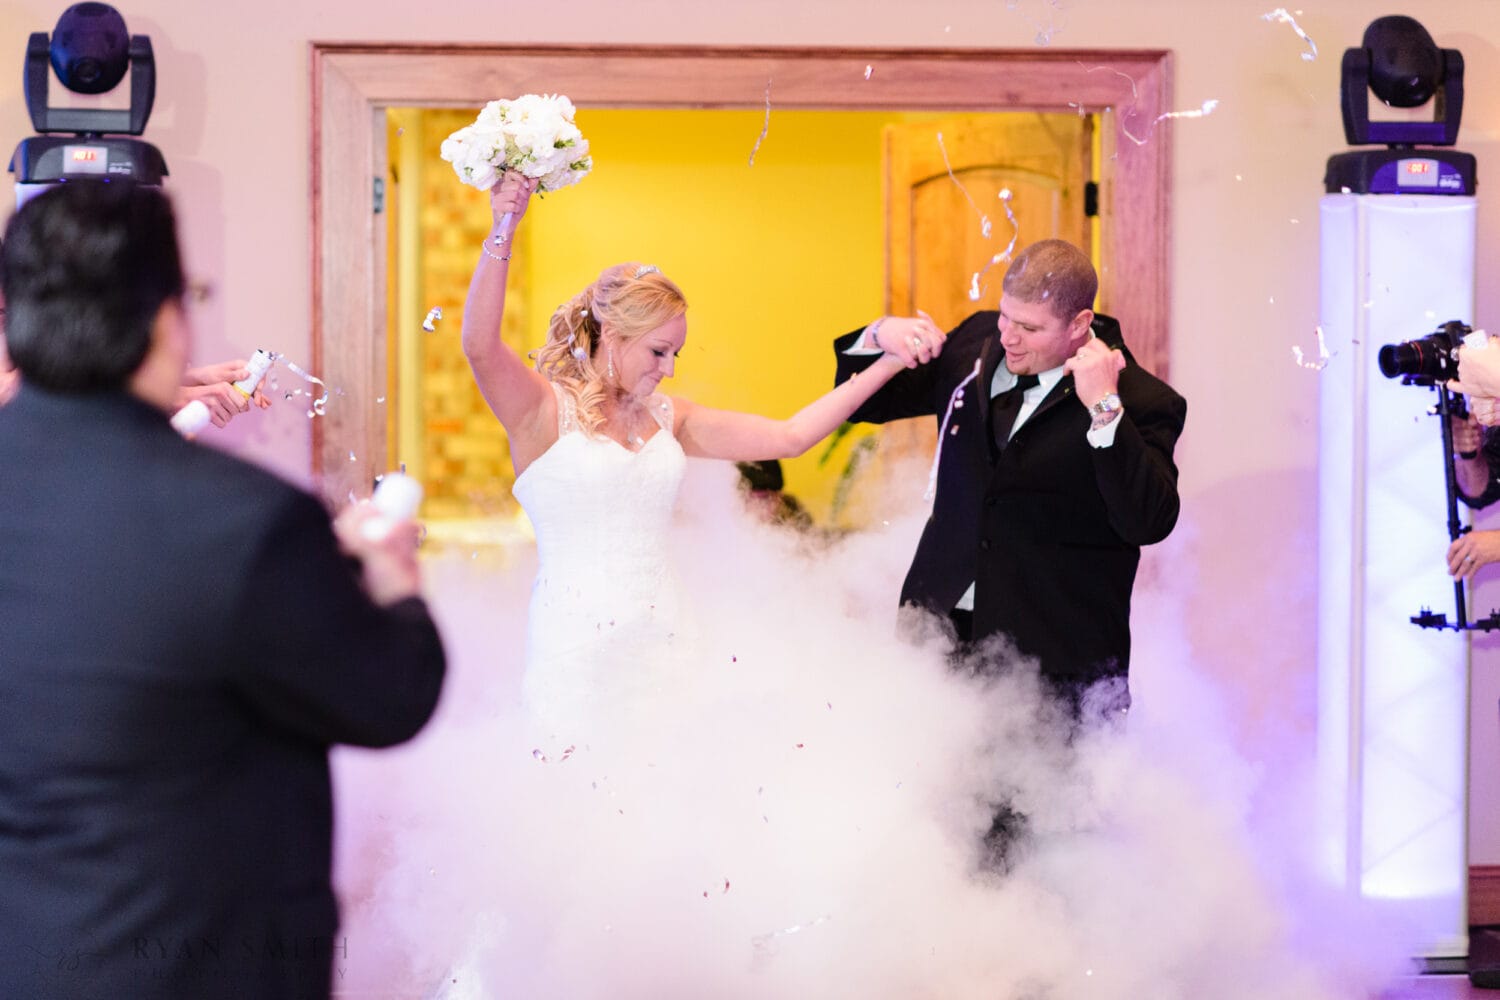 Introduction to reception with a fog machine - St Johns Inn, Myrtle Beach